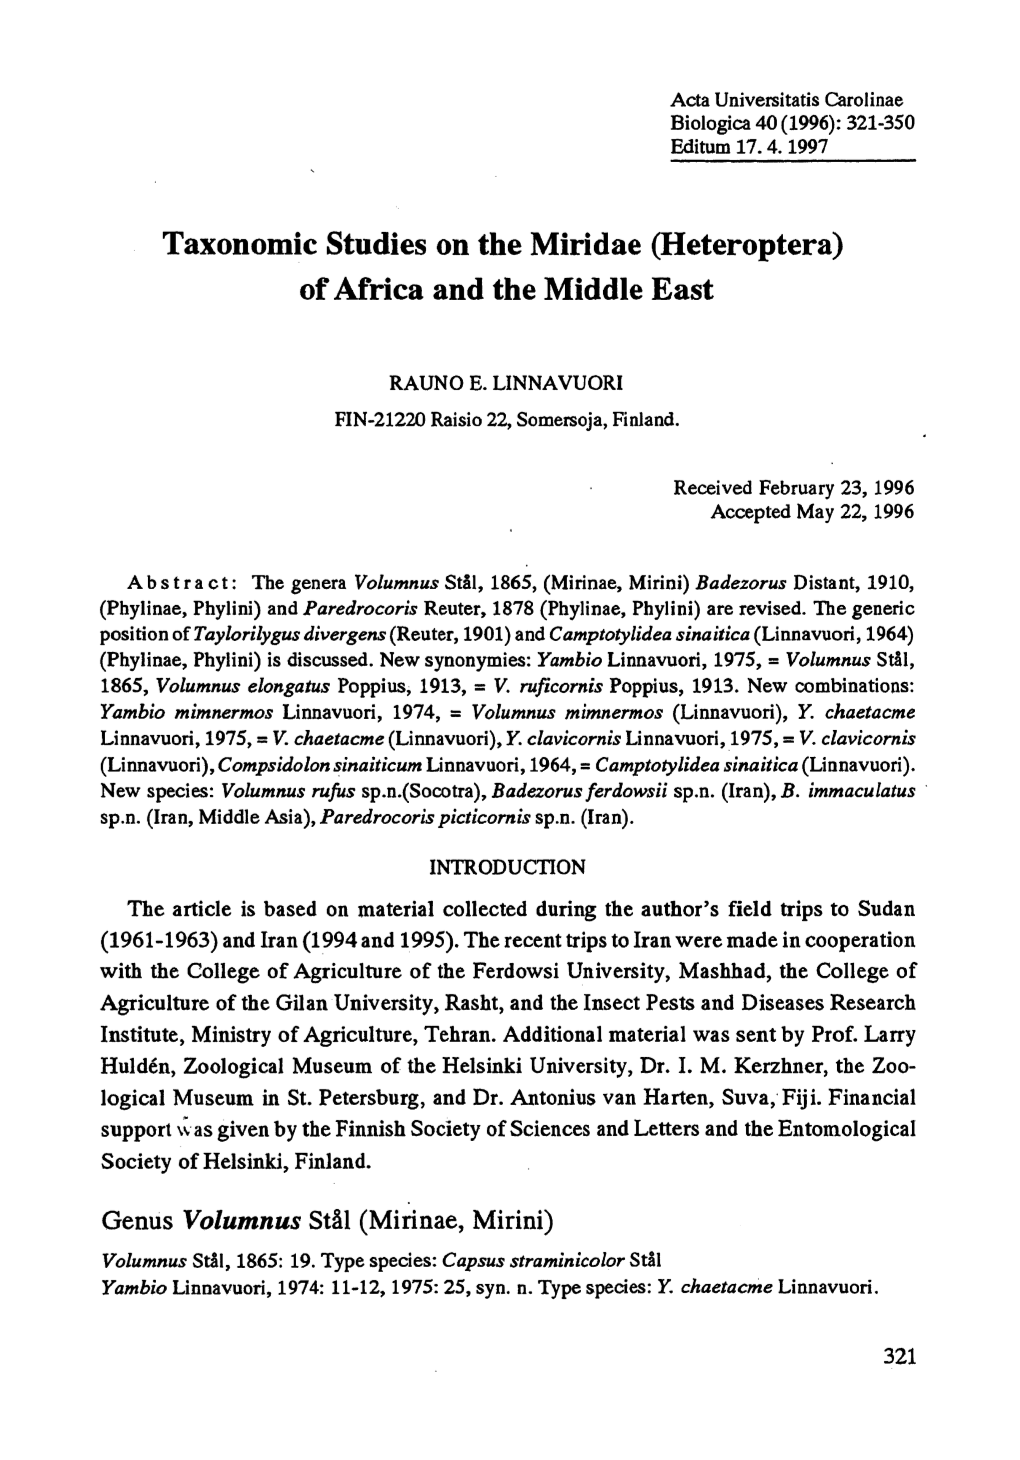 Taxonomic Studies on the Miridae (Heteroptera) Ofafrica and the Middle East